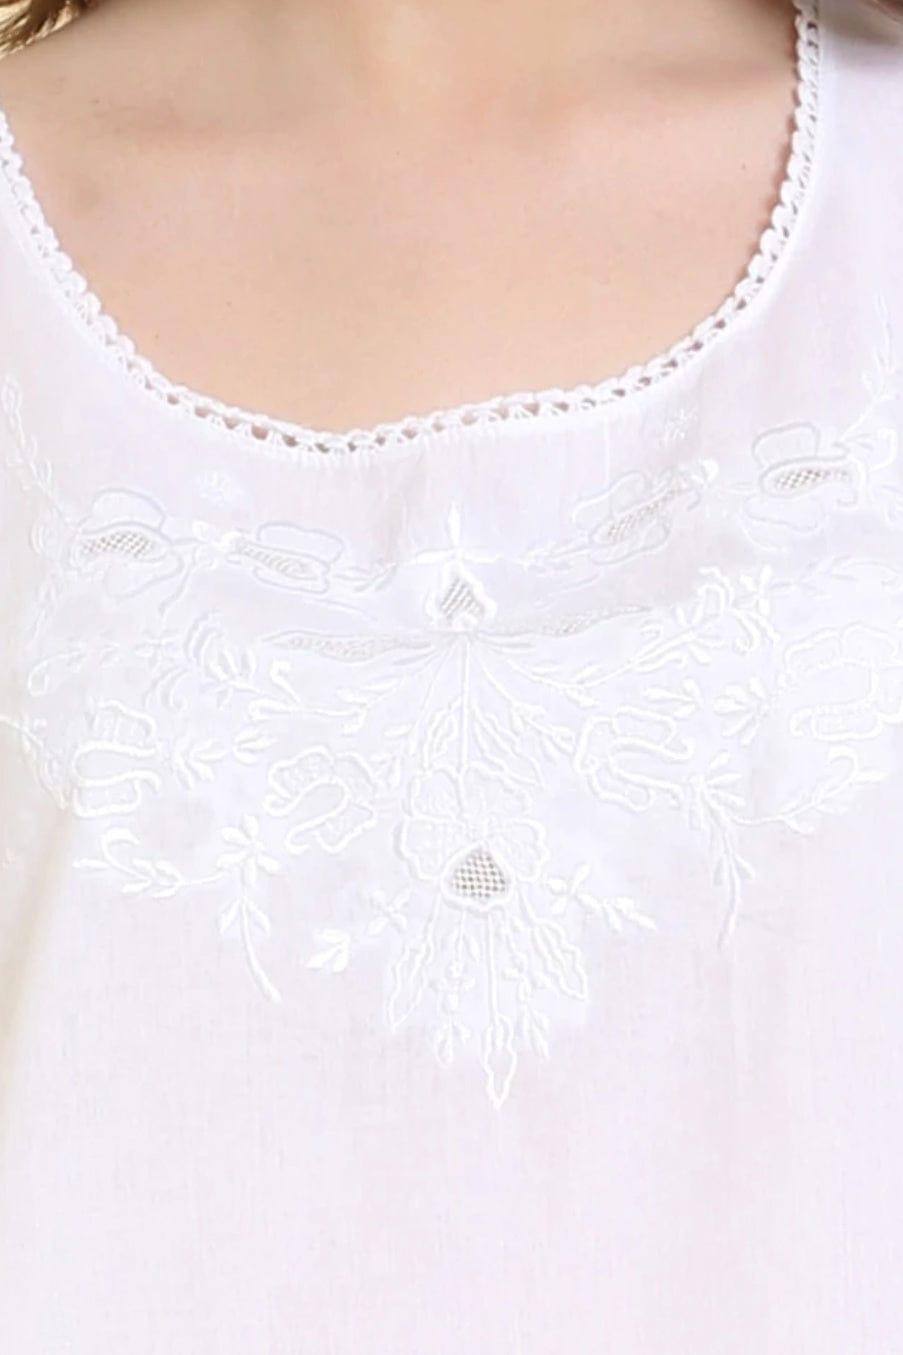 Close up of neckline of white cotton nightgown. Stitching and cutout detail.